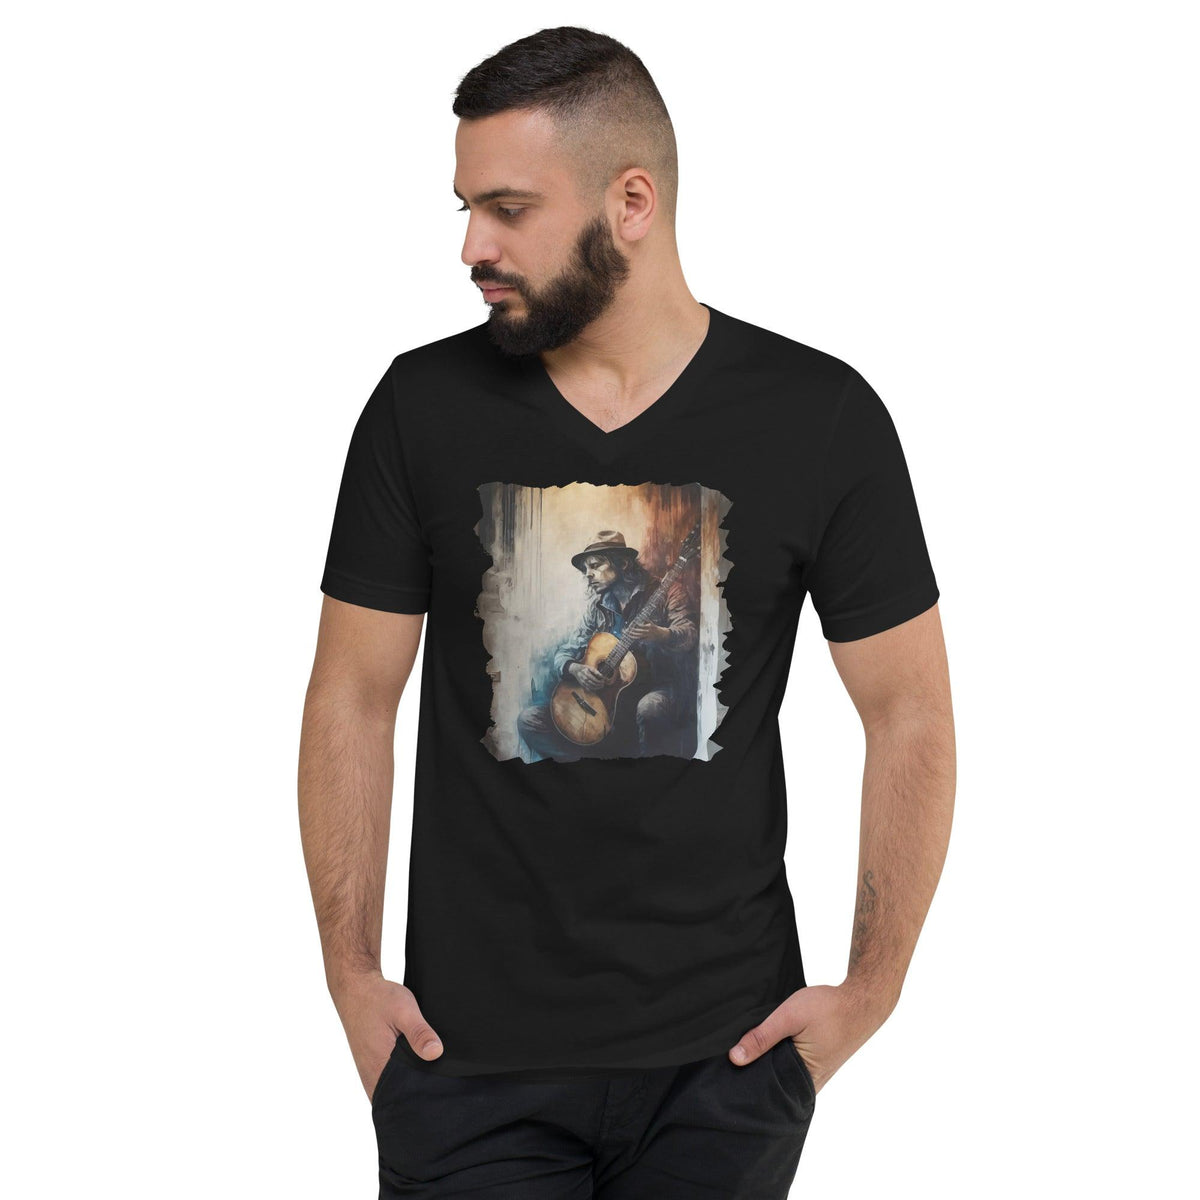 Guitar Is Poetry in Motion Unisex Short Sleeve V-Neck T-Shirt - Beyond T-shirts